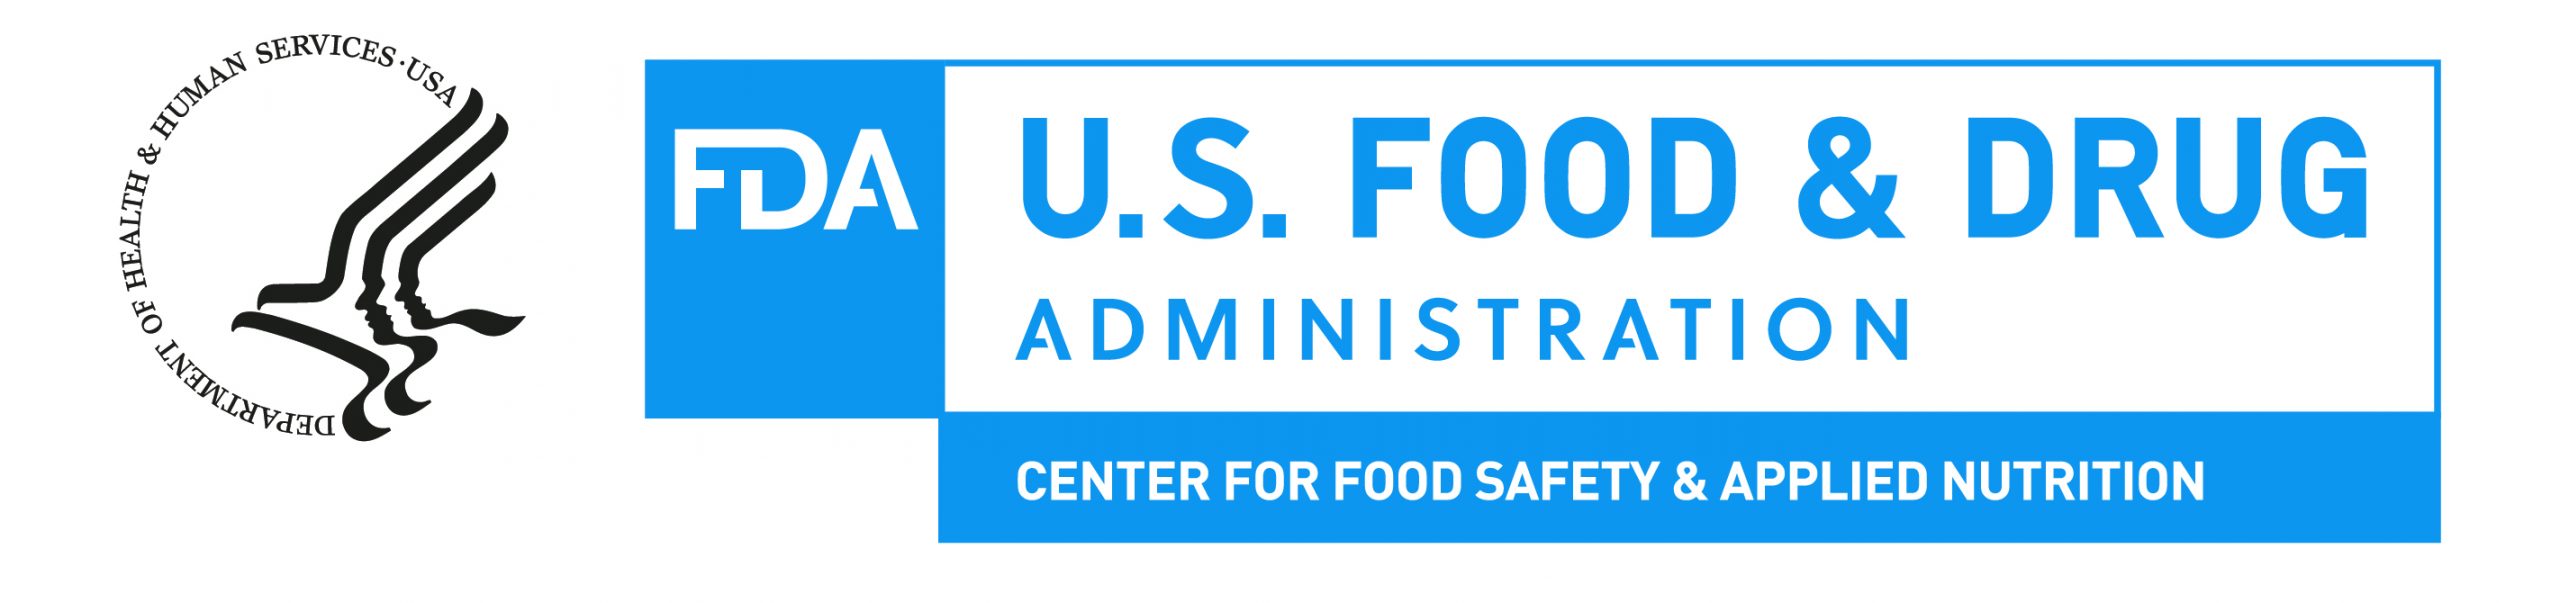 Food and Drug Administration, Center for Food Safety and Applied Nutrition (CFSAN)